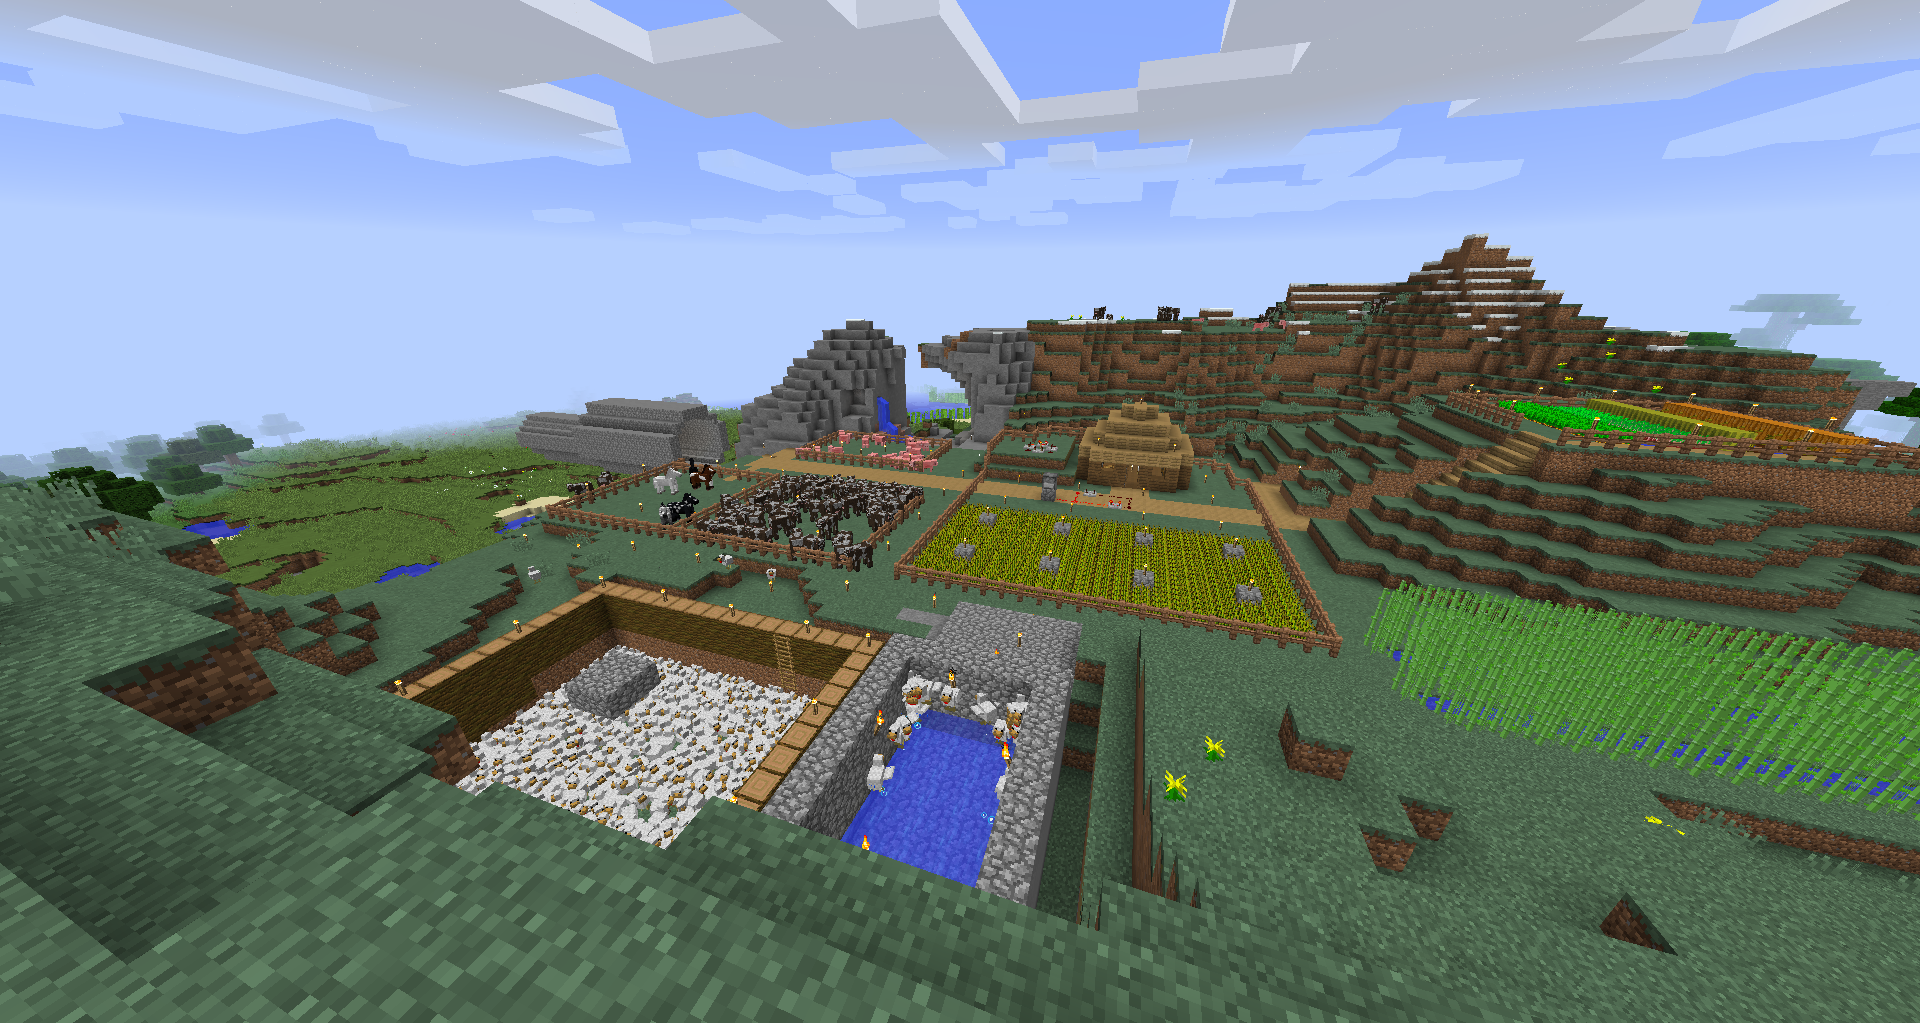 Caradine's house in minecraft